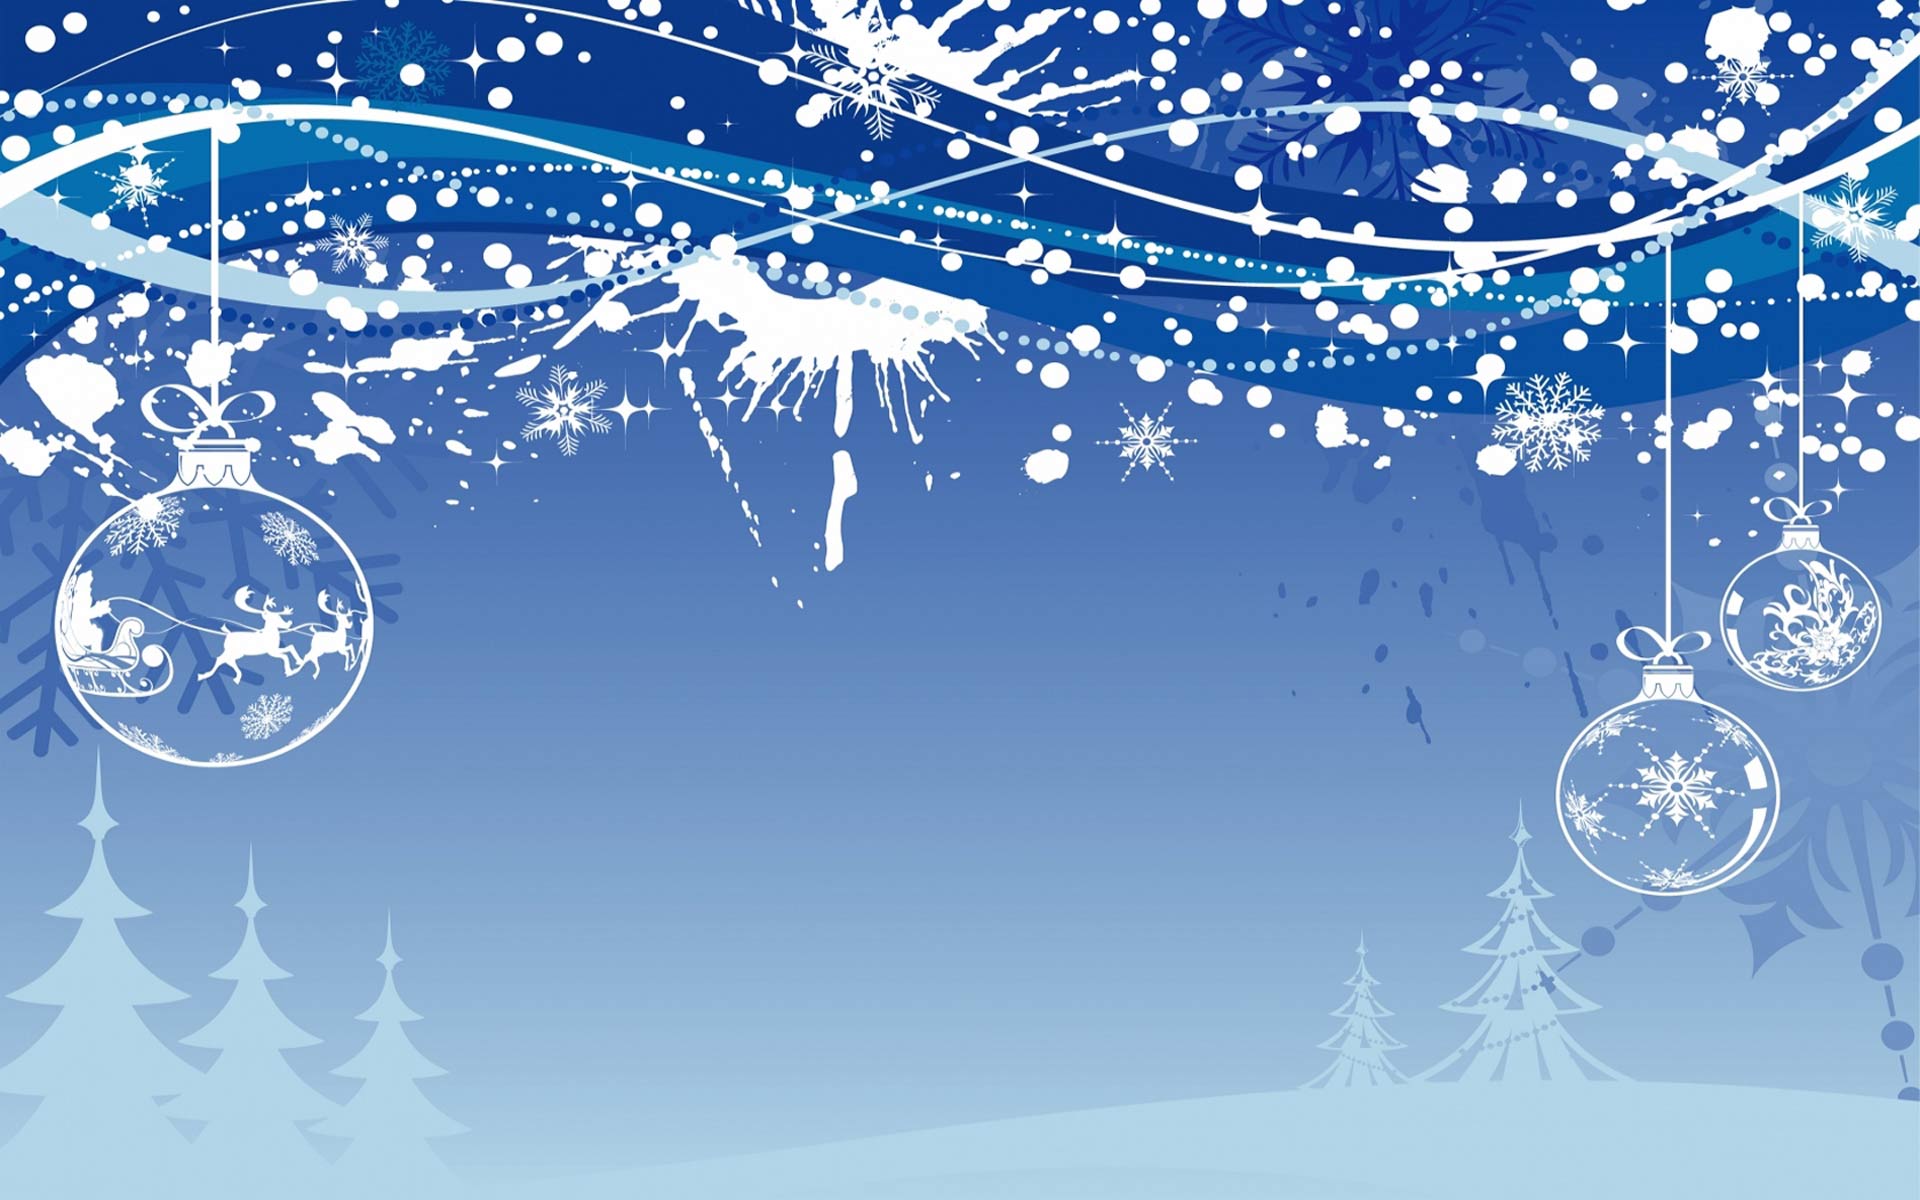 Christmas Wallpaper Widescreen 10346 Hd Wallpapers in Celebrations